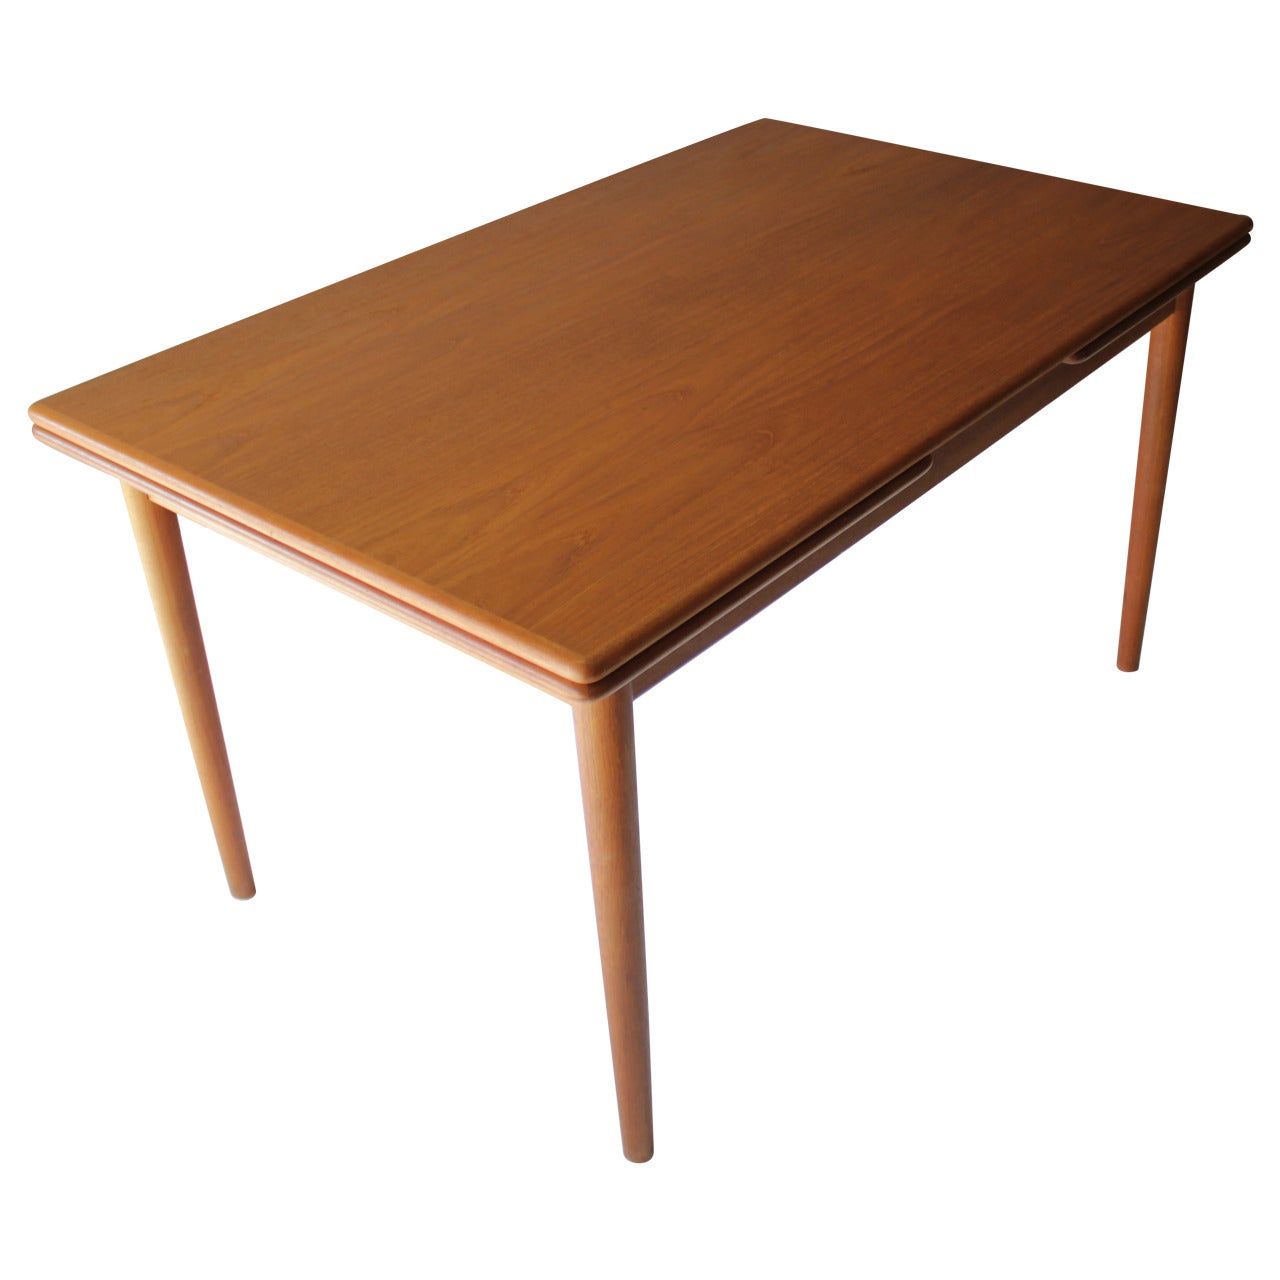 Danish Teak Dining Room Table with Two Leaves